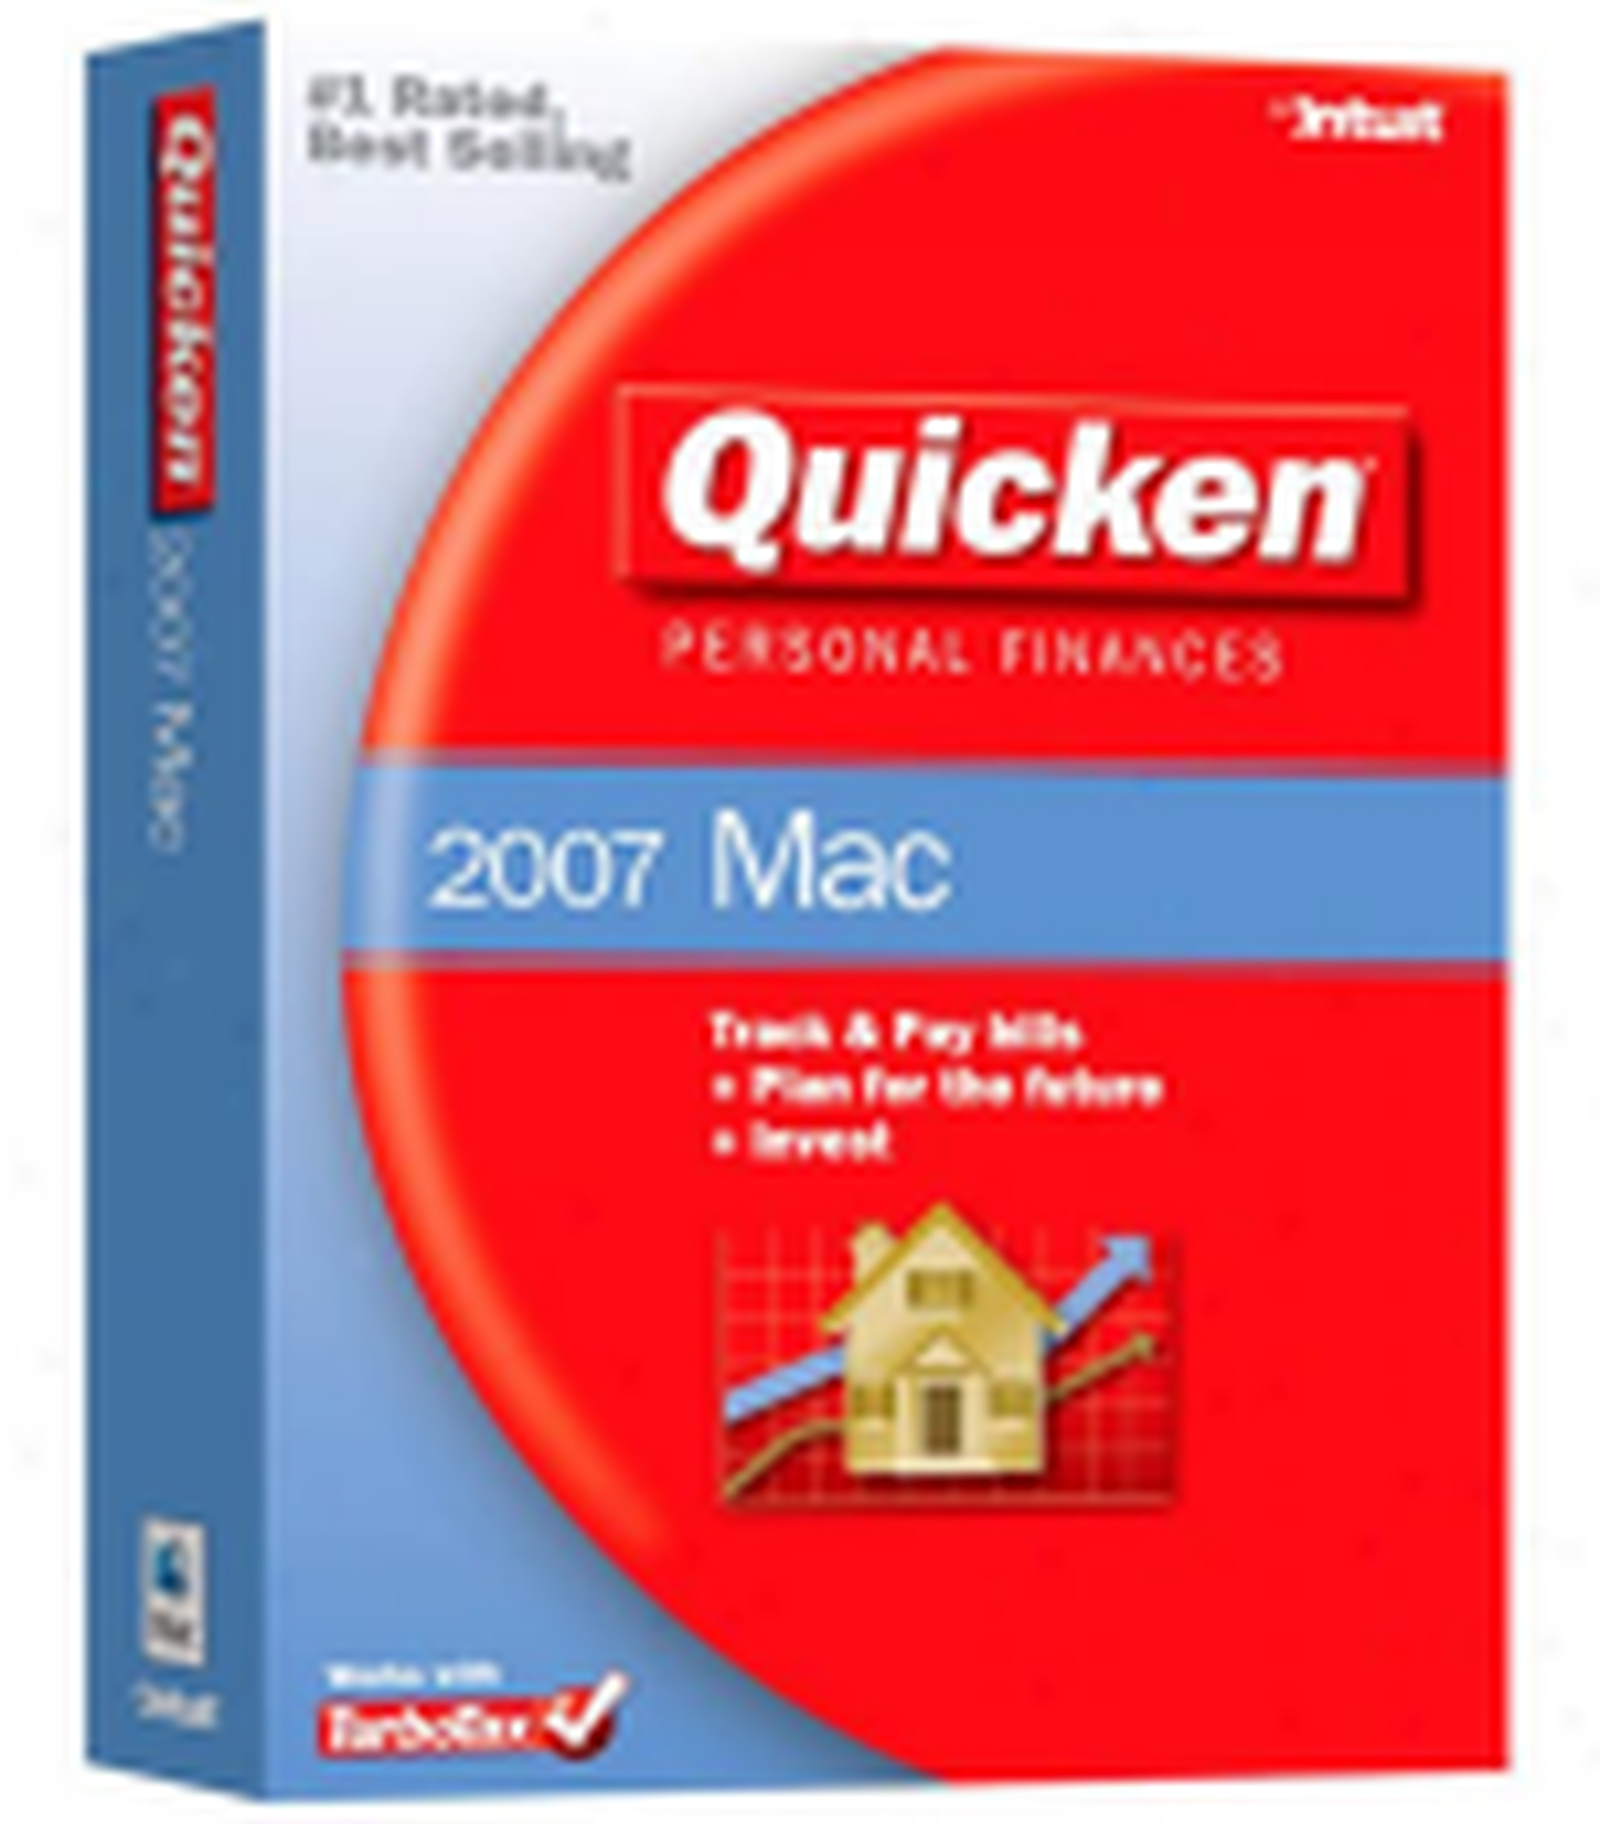 does quicken 2007 for mac work with 10.6